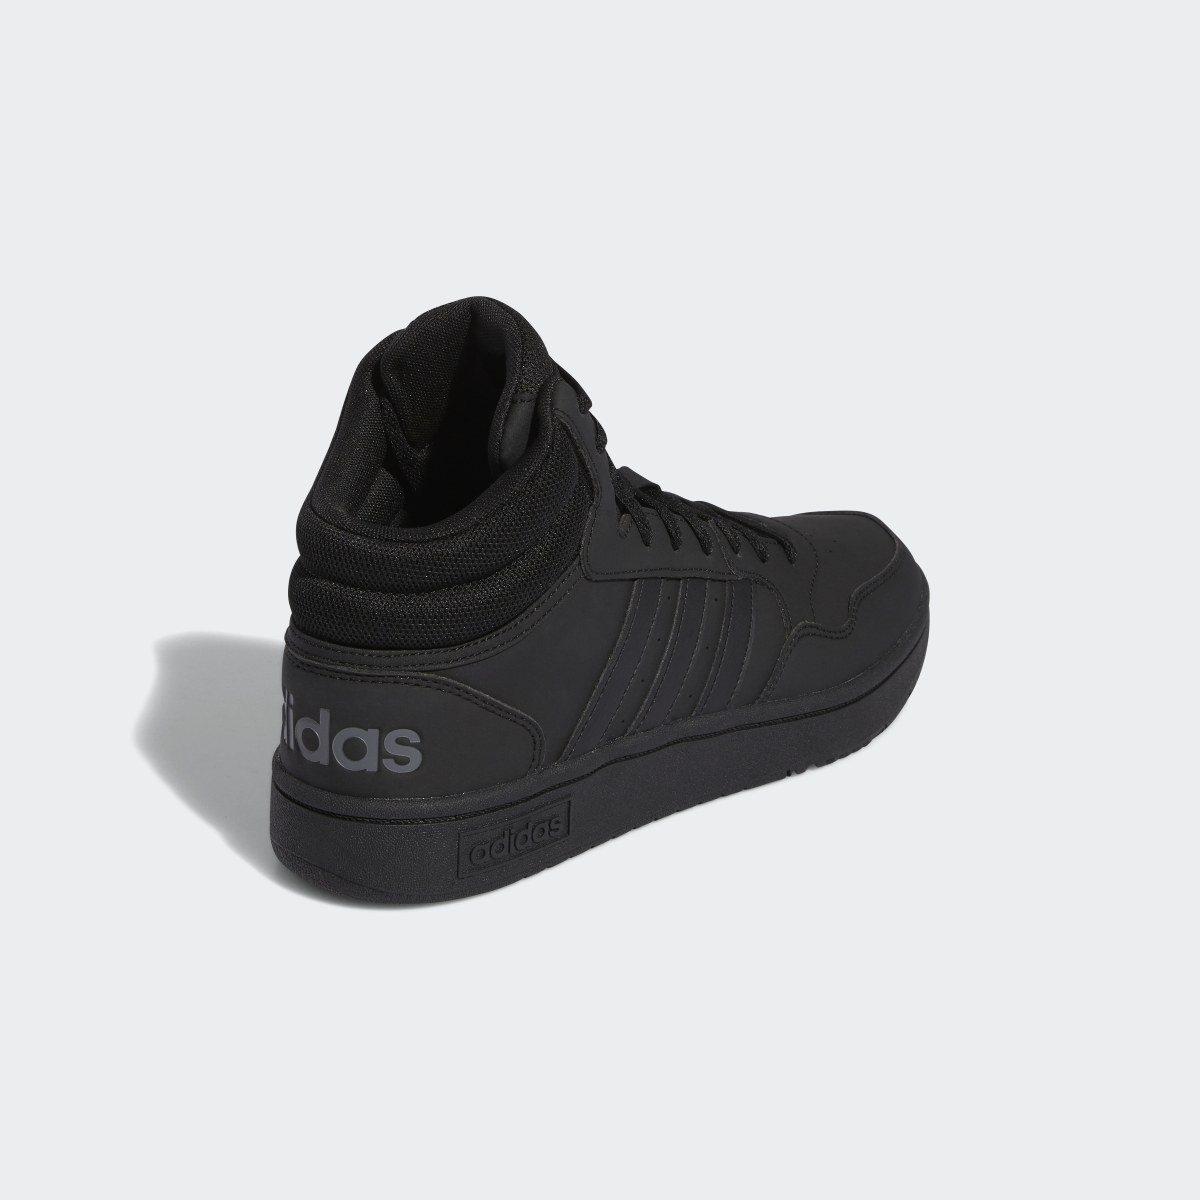 Adidas Hoops 3 Mid Lifestyle Basketball Mid Classic Schuh. 6